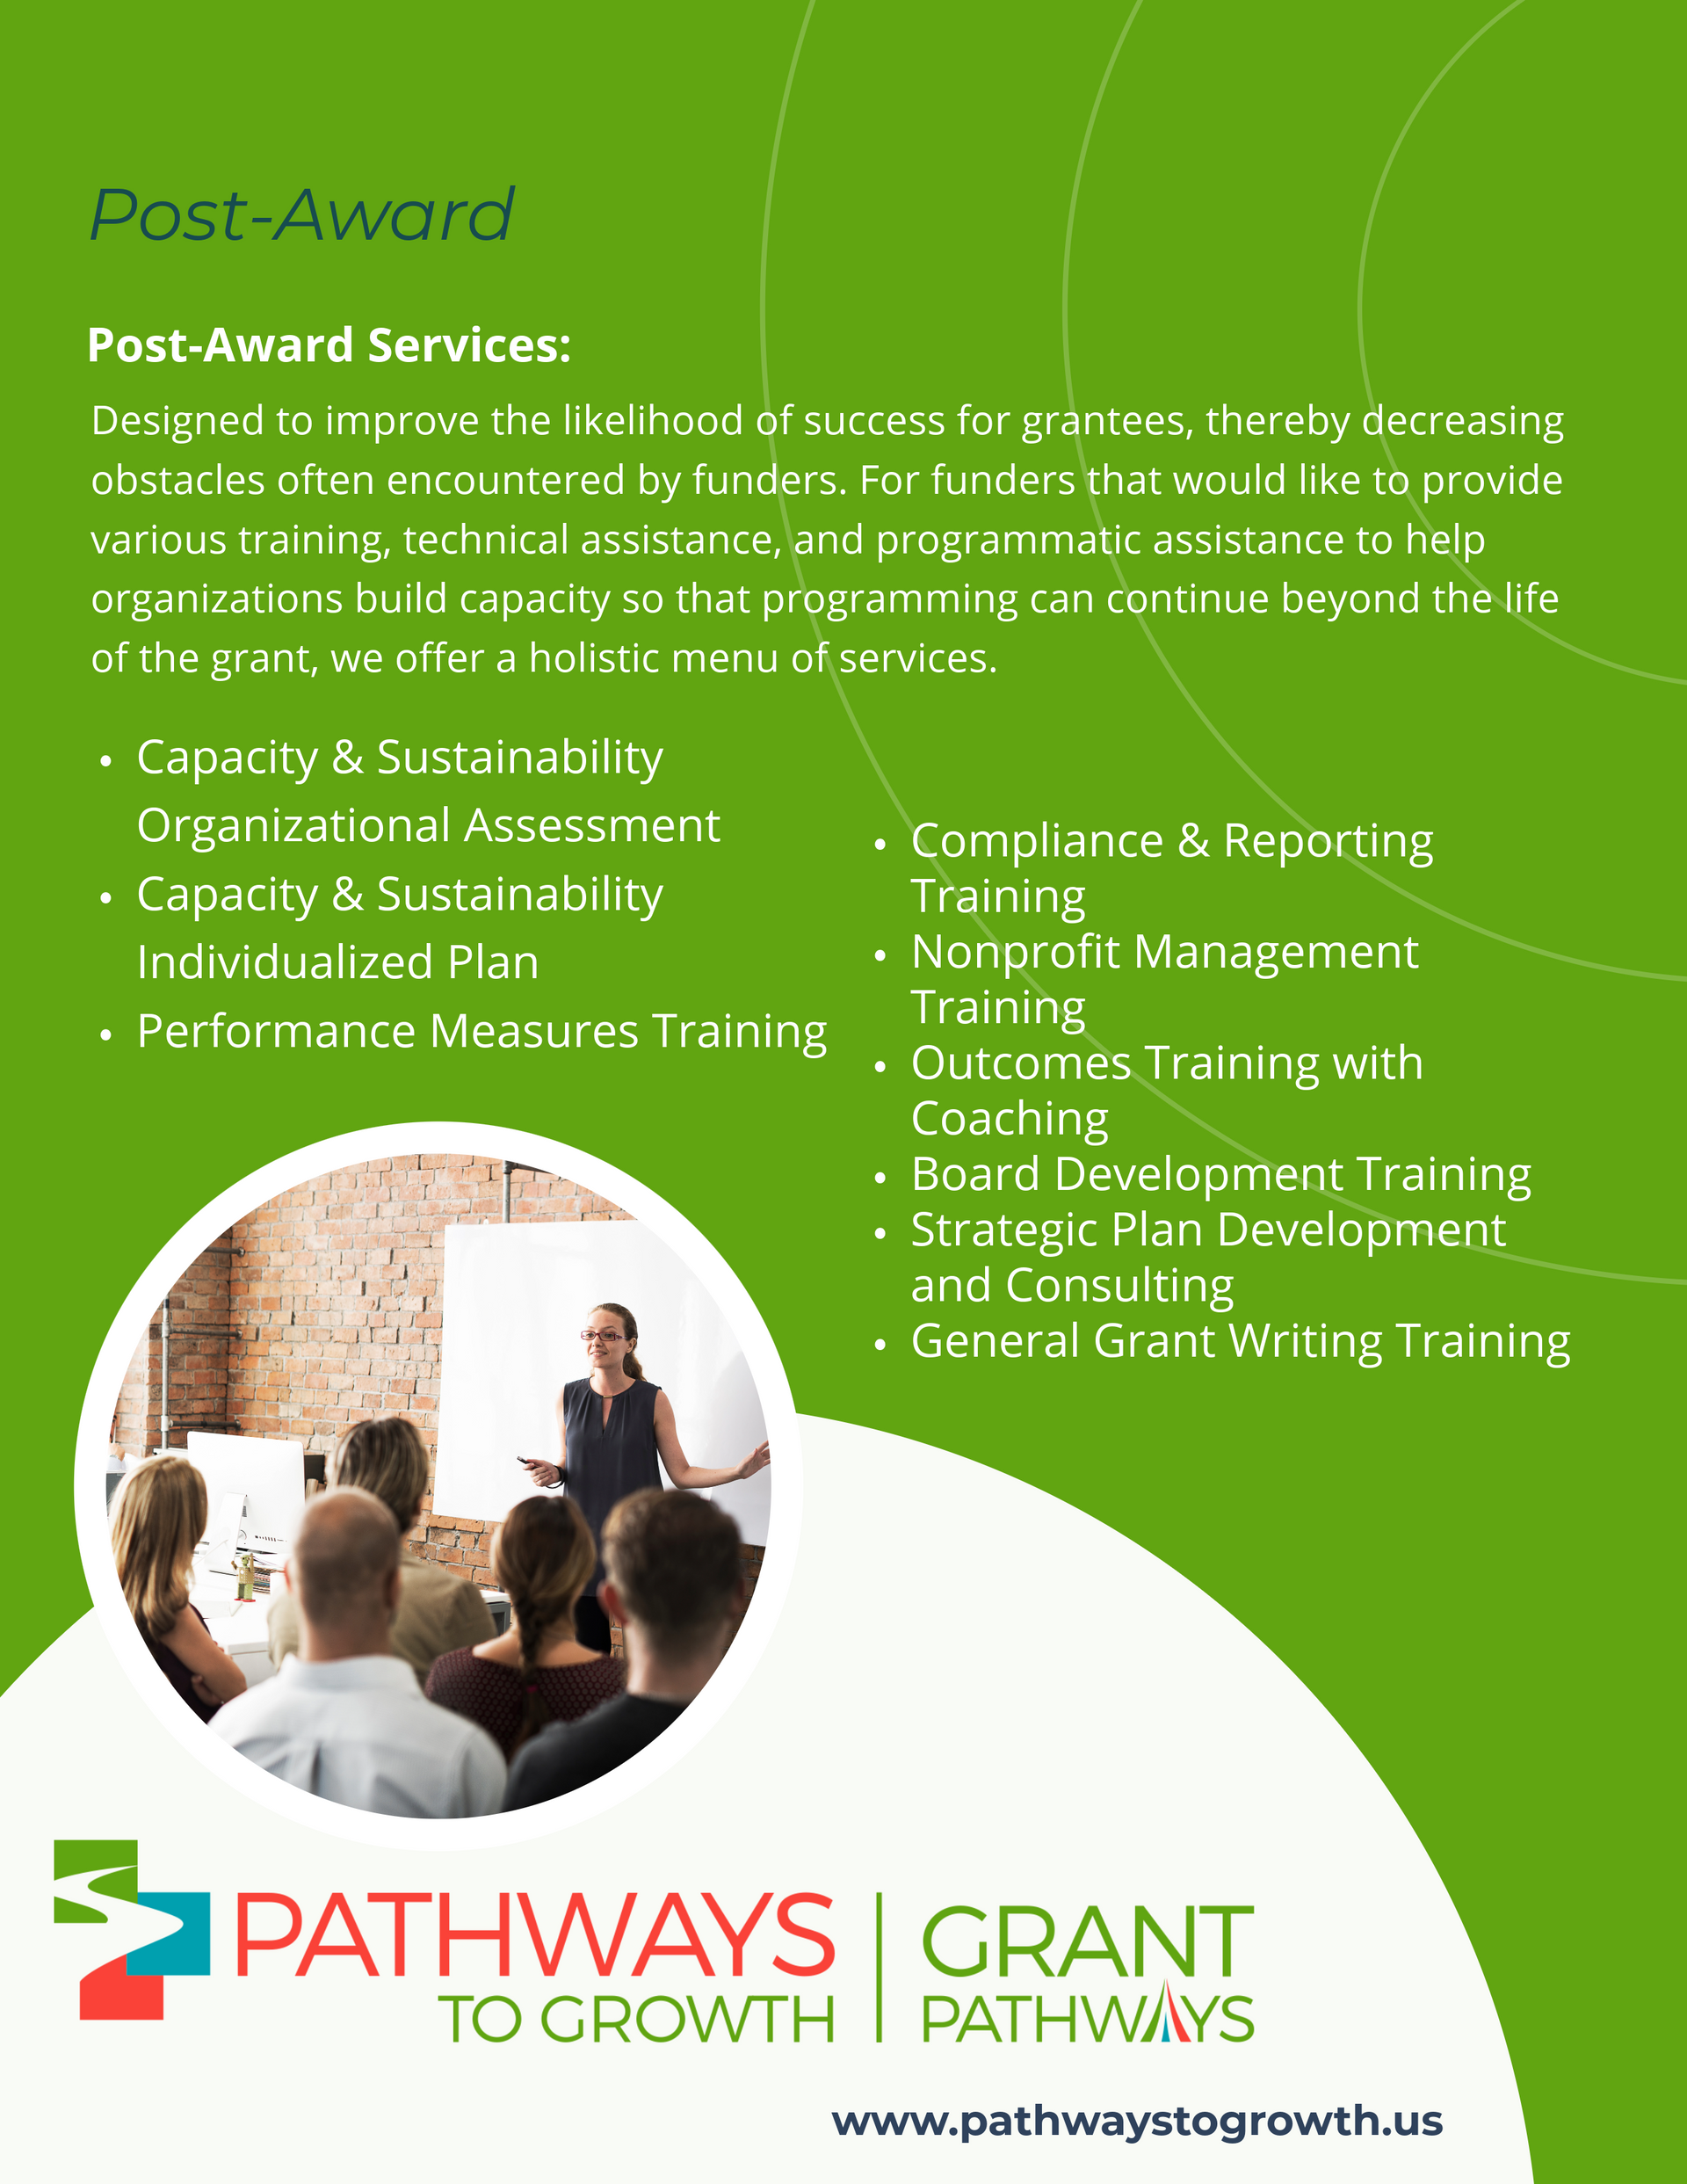 Post-Award Services for Grant Awardees
